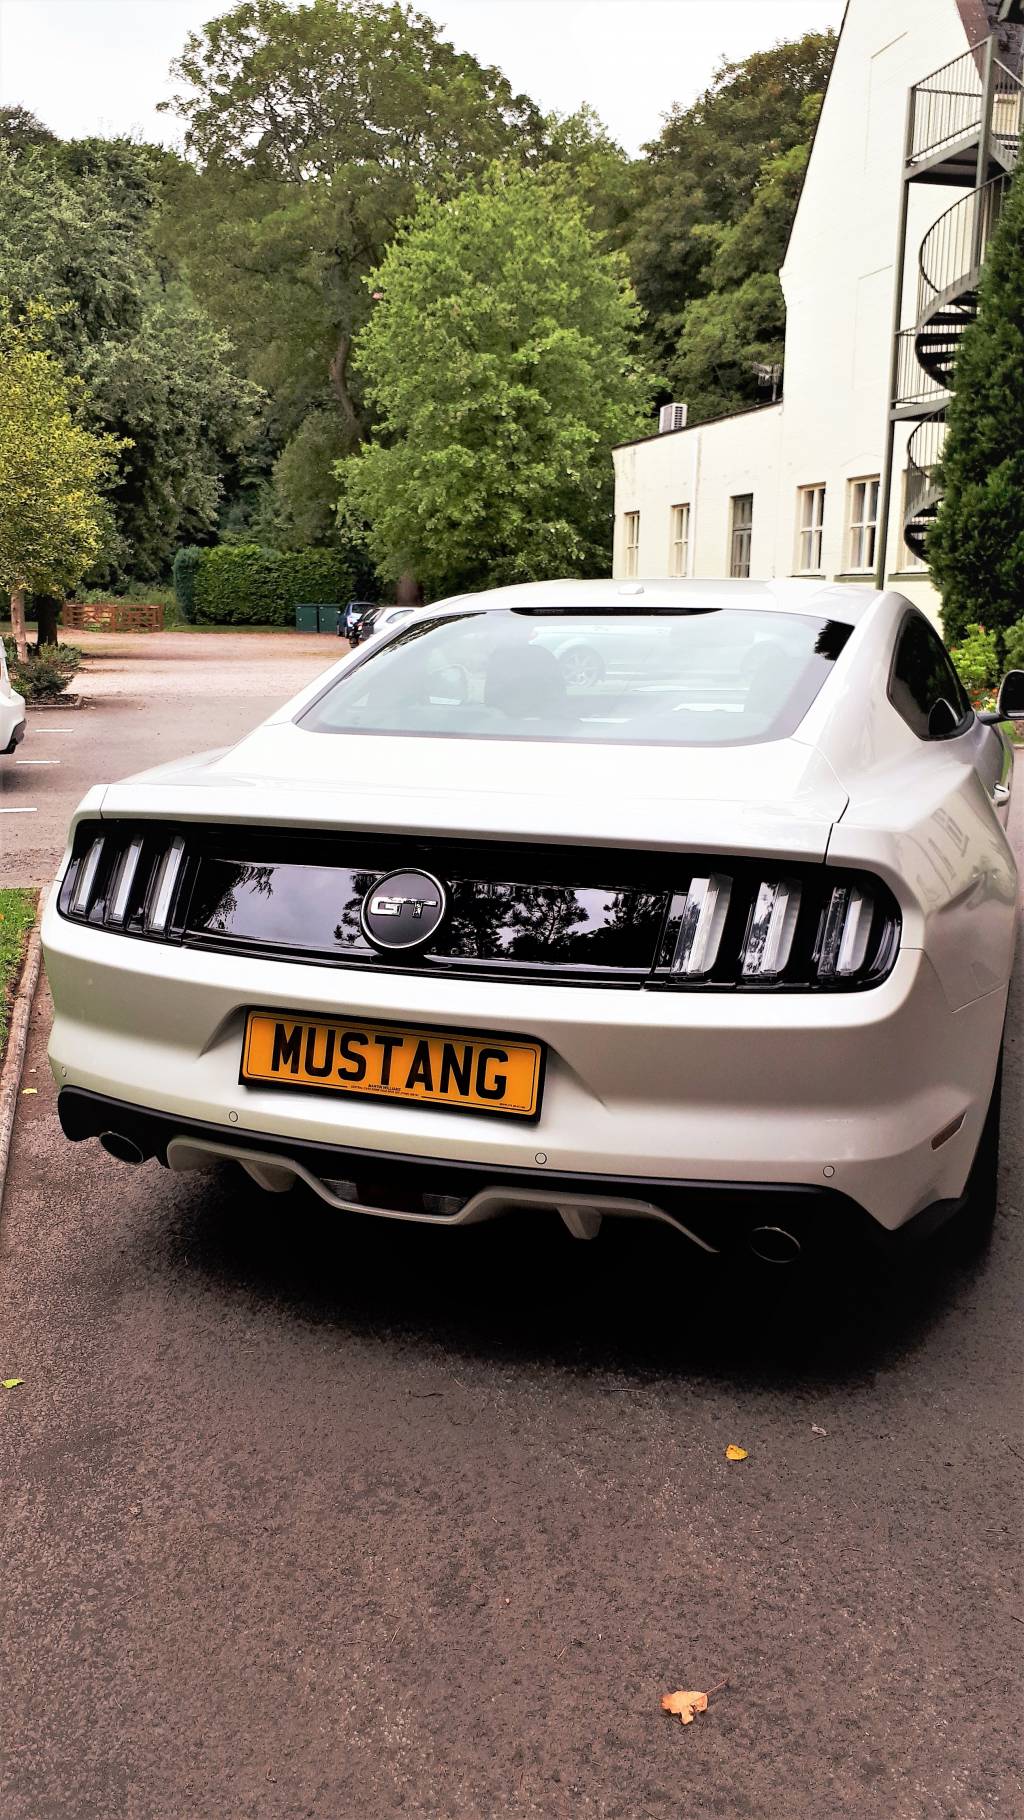 Image of 2018 white Ford Mustang in the hotel grounds